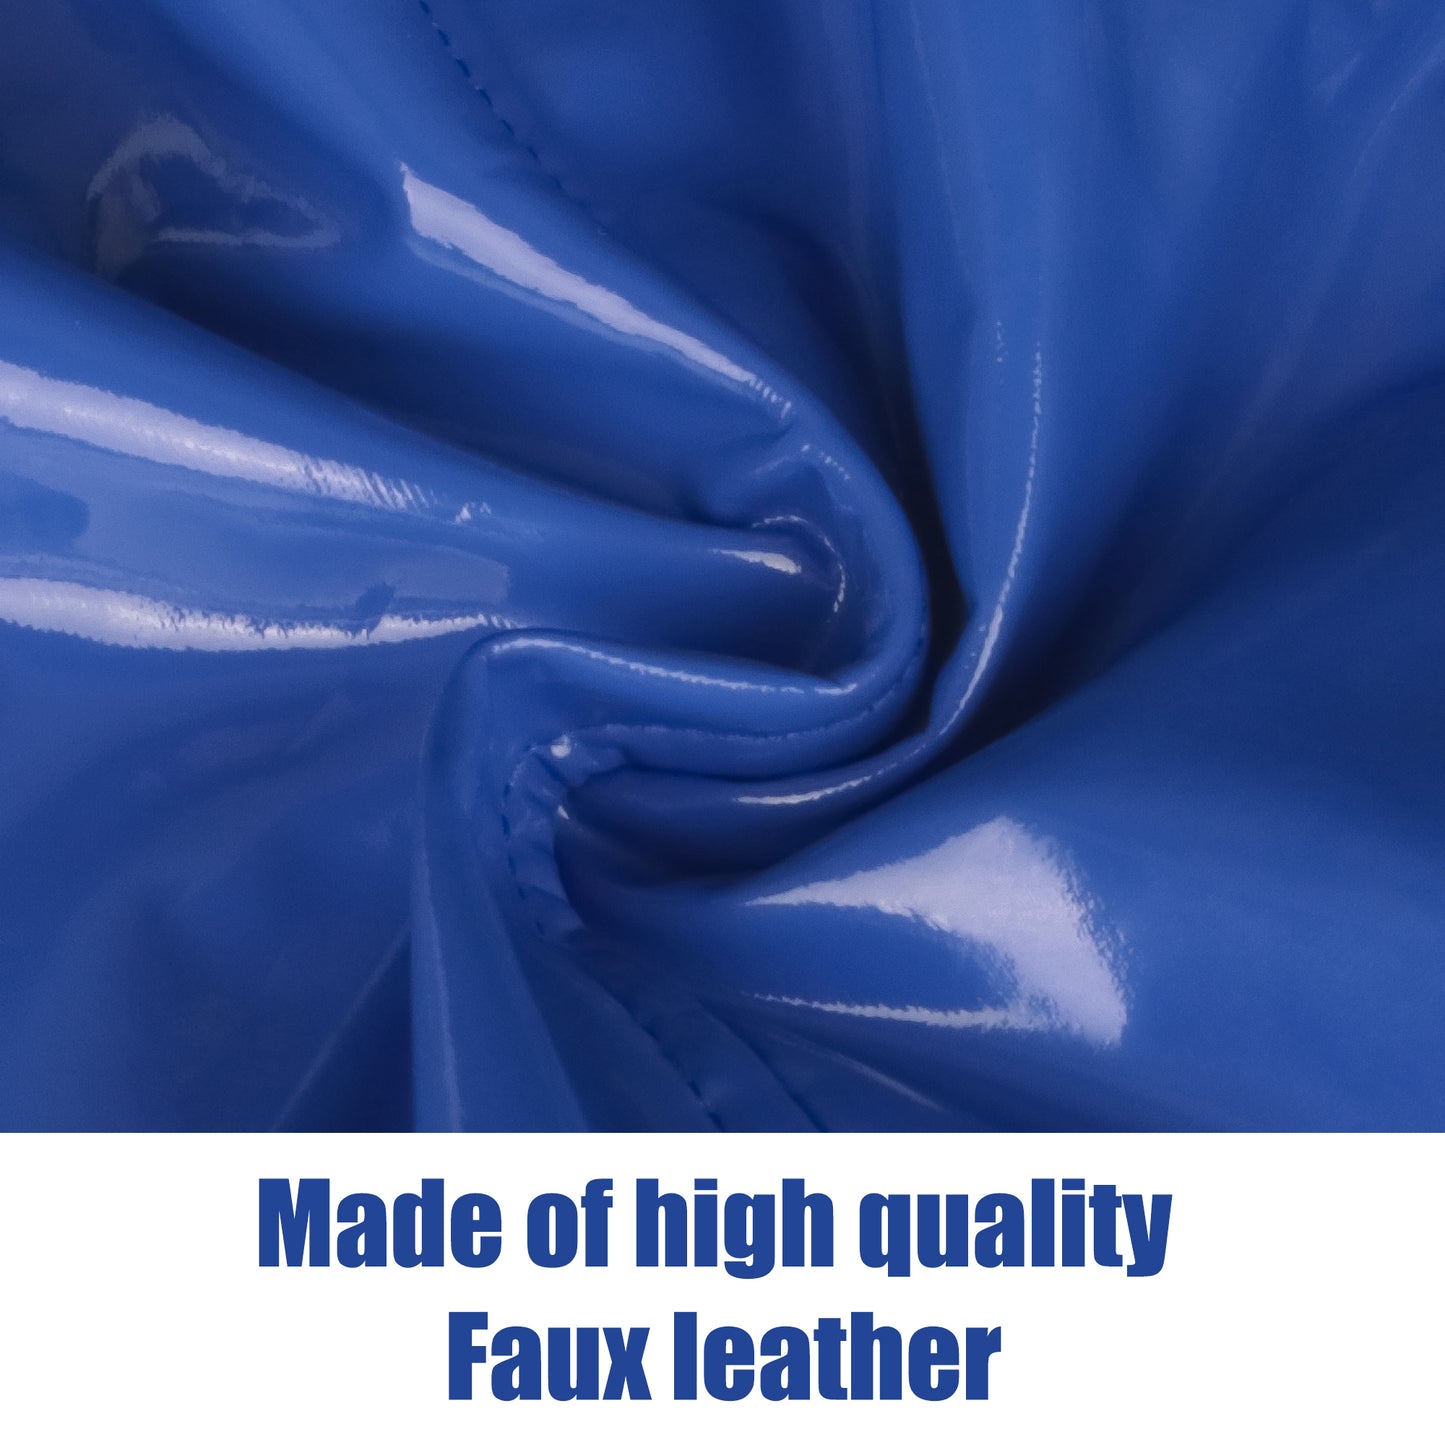 The blue faux leather strap on shorts are made of high quality faux leather